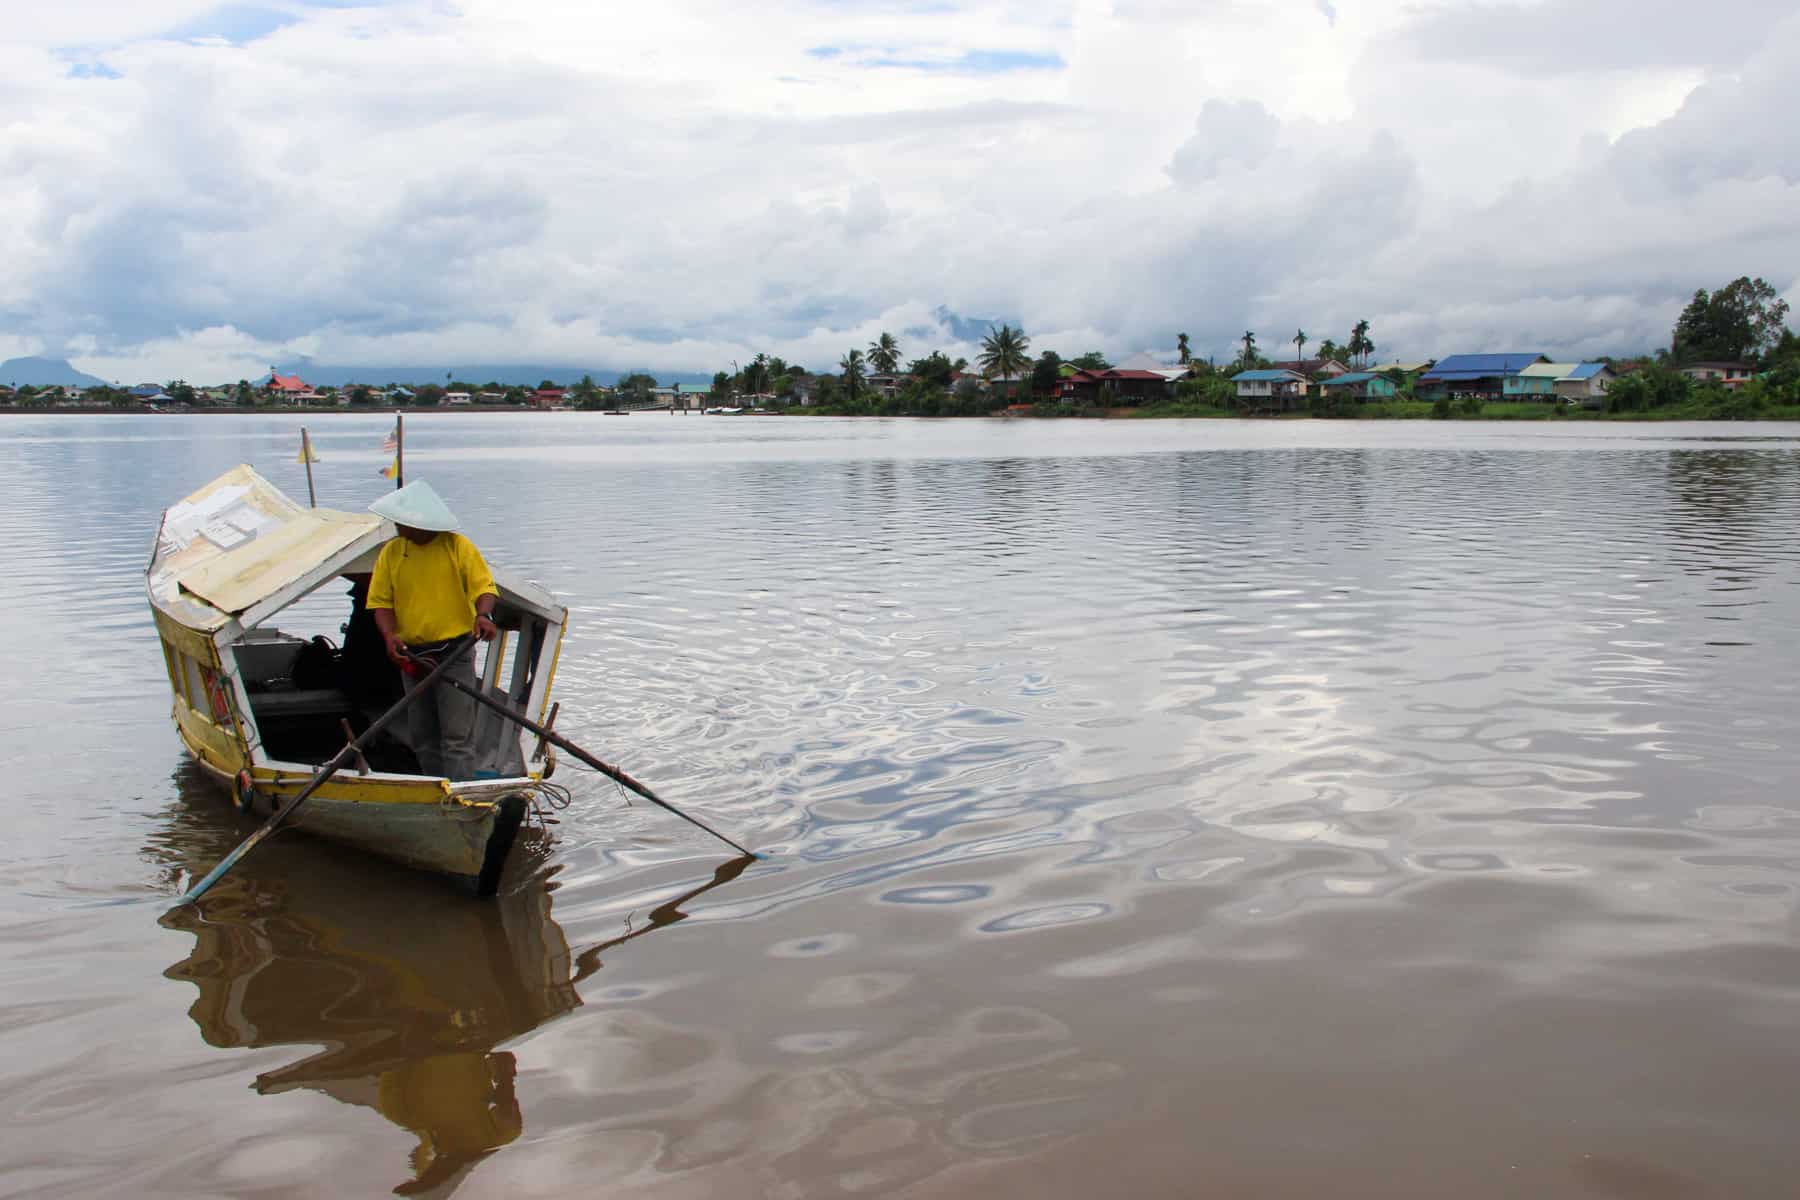 A man in a yellow t-shirt rows a white roofed boat with wooden oars on the chocolate brown waters of the Sarawak River in Kuching